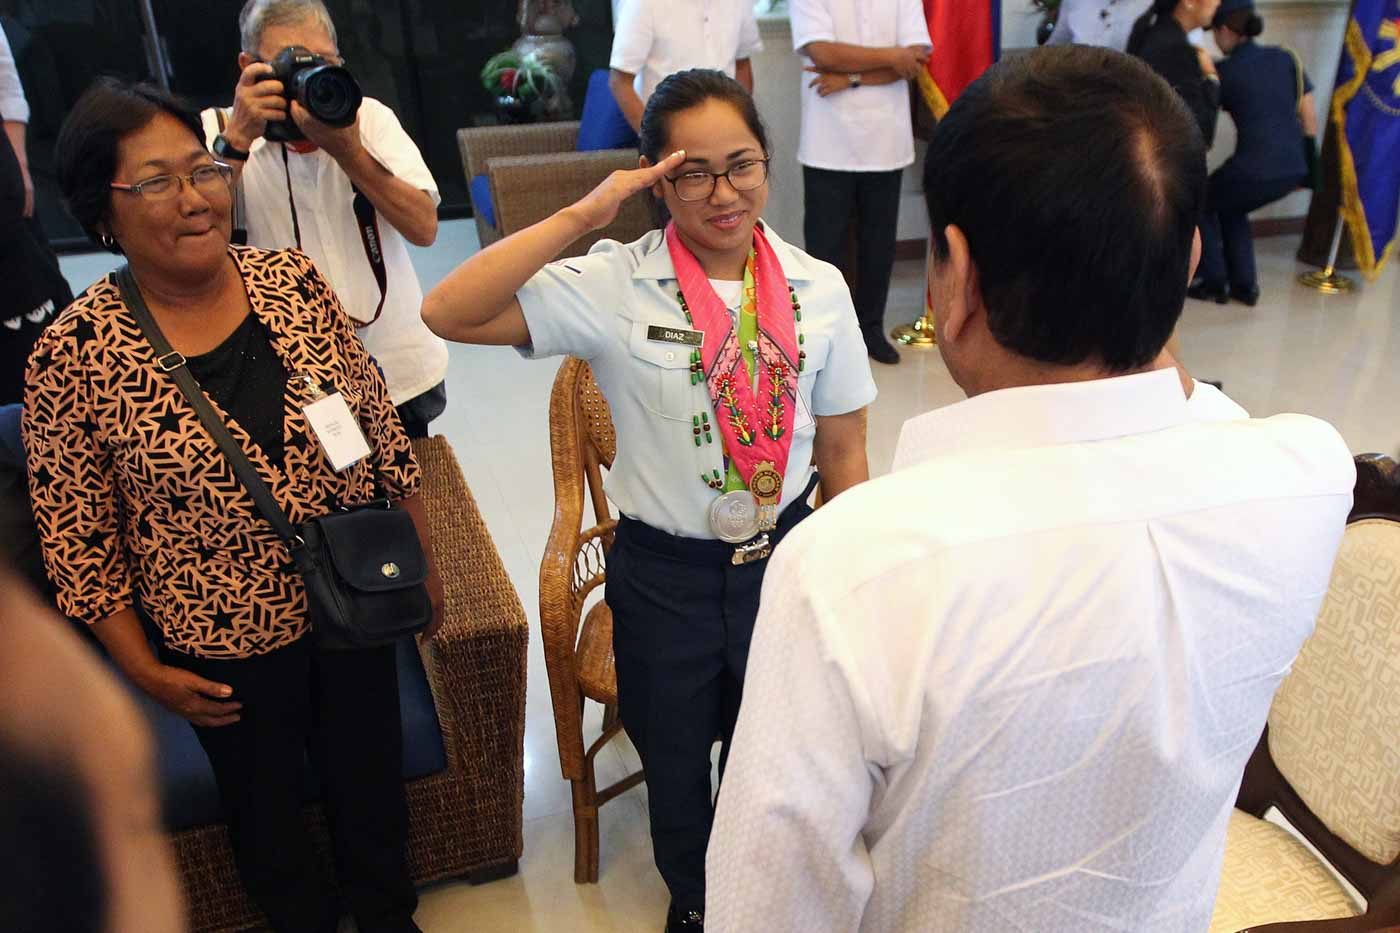 President Rodrigo Duterte gives Airwoman Second Class Hidilyn Diaz a congratulatory salute during a courtesy call at the Presidential Guest House in Davao City on August 11. Diaz, who won a silver in Rio, is the first Filipina and Mindanaoan Olympic medalist. Photo by Ace Morandante/PPD  